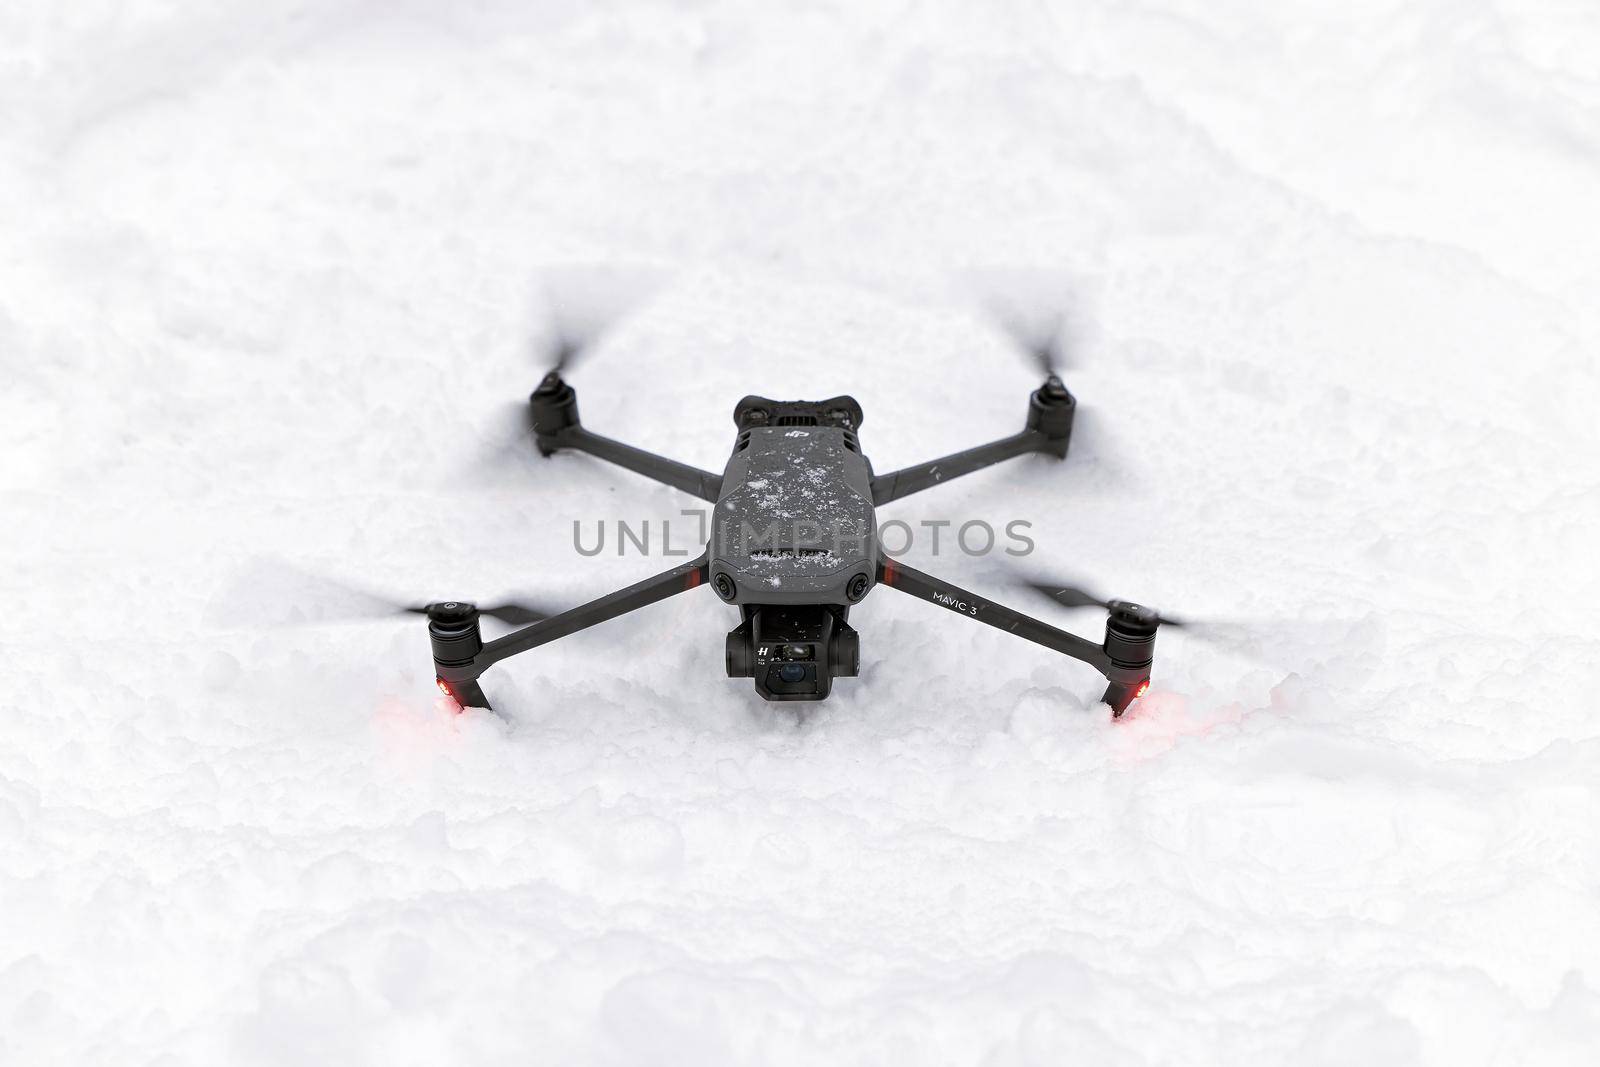 New DJI Mavic 3 on snow, takeoff in snow conditions. DJI Mavic 3 one of the most portable drones in the market, with Hasselblad camera. 25.01.2022 Rostov-on-Don, Russia by EvgeniyQW